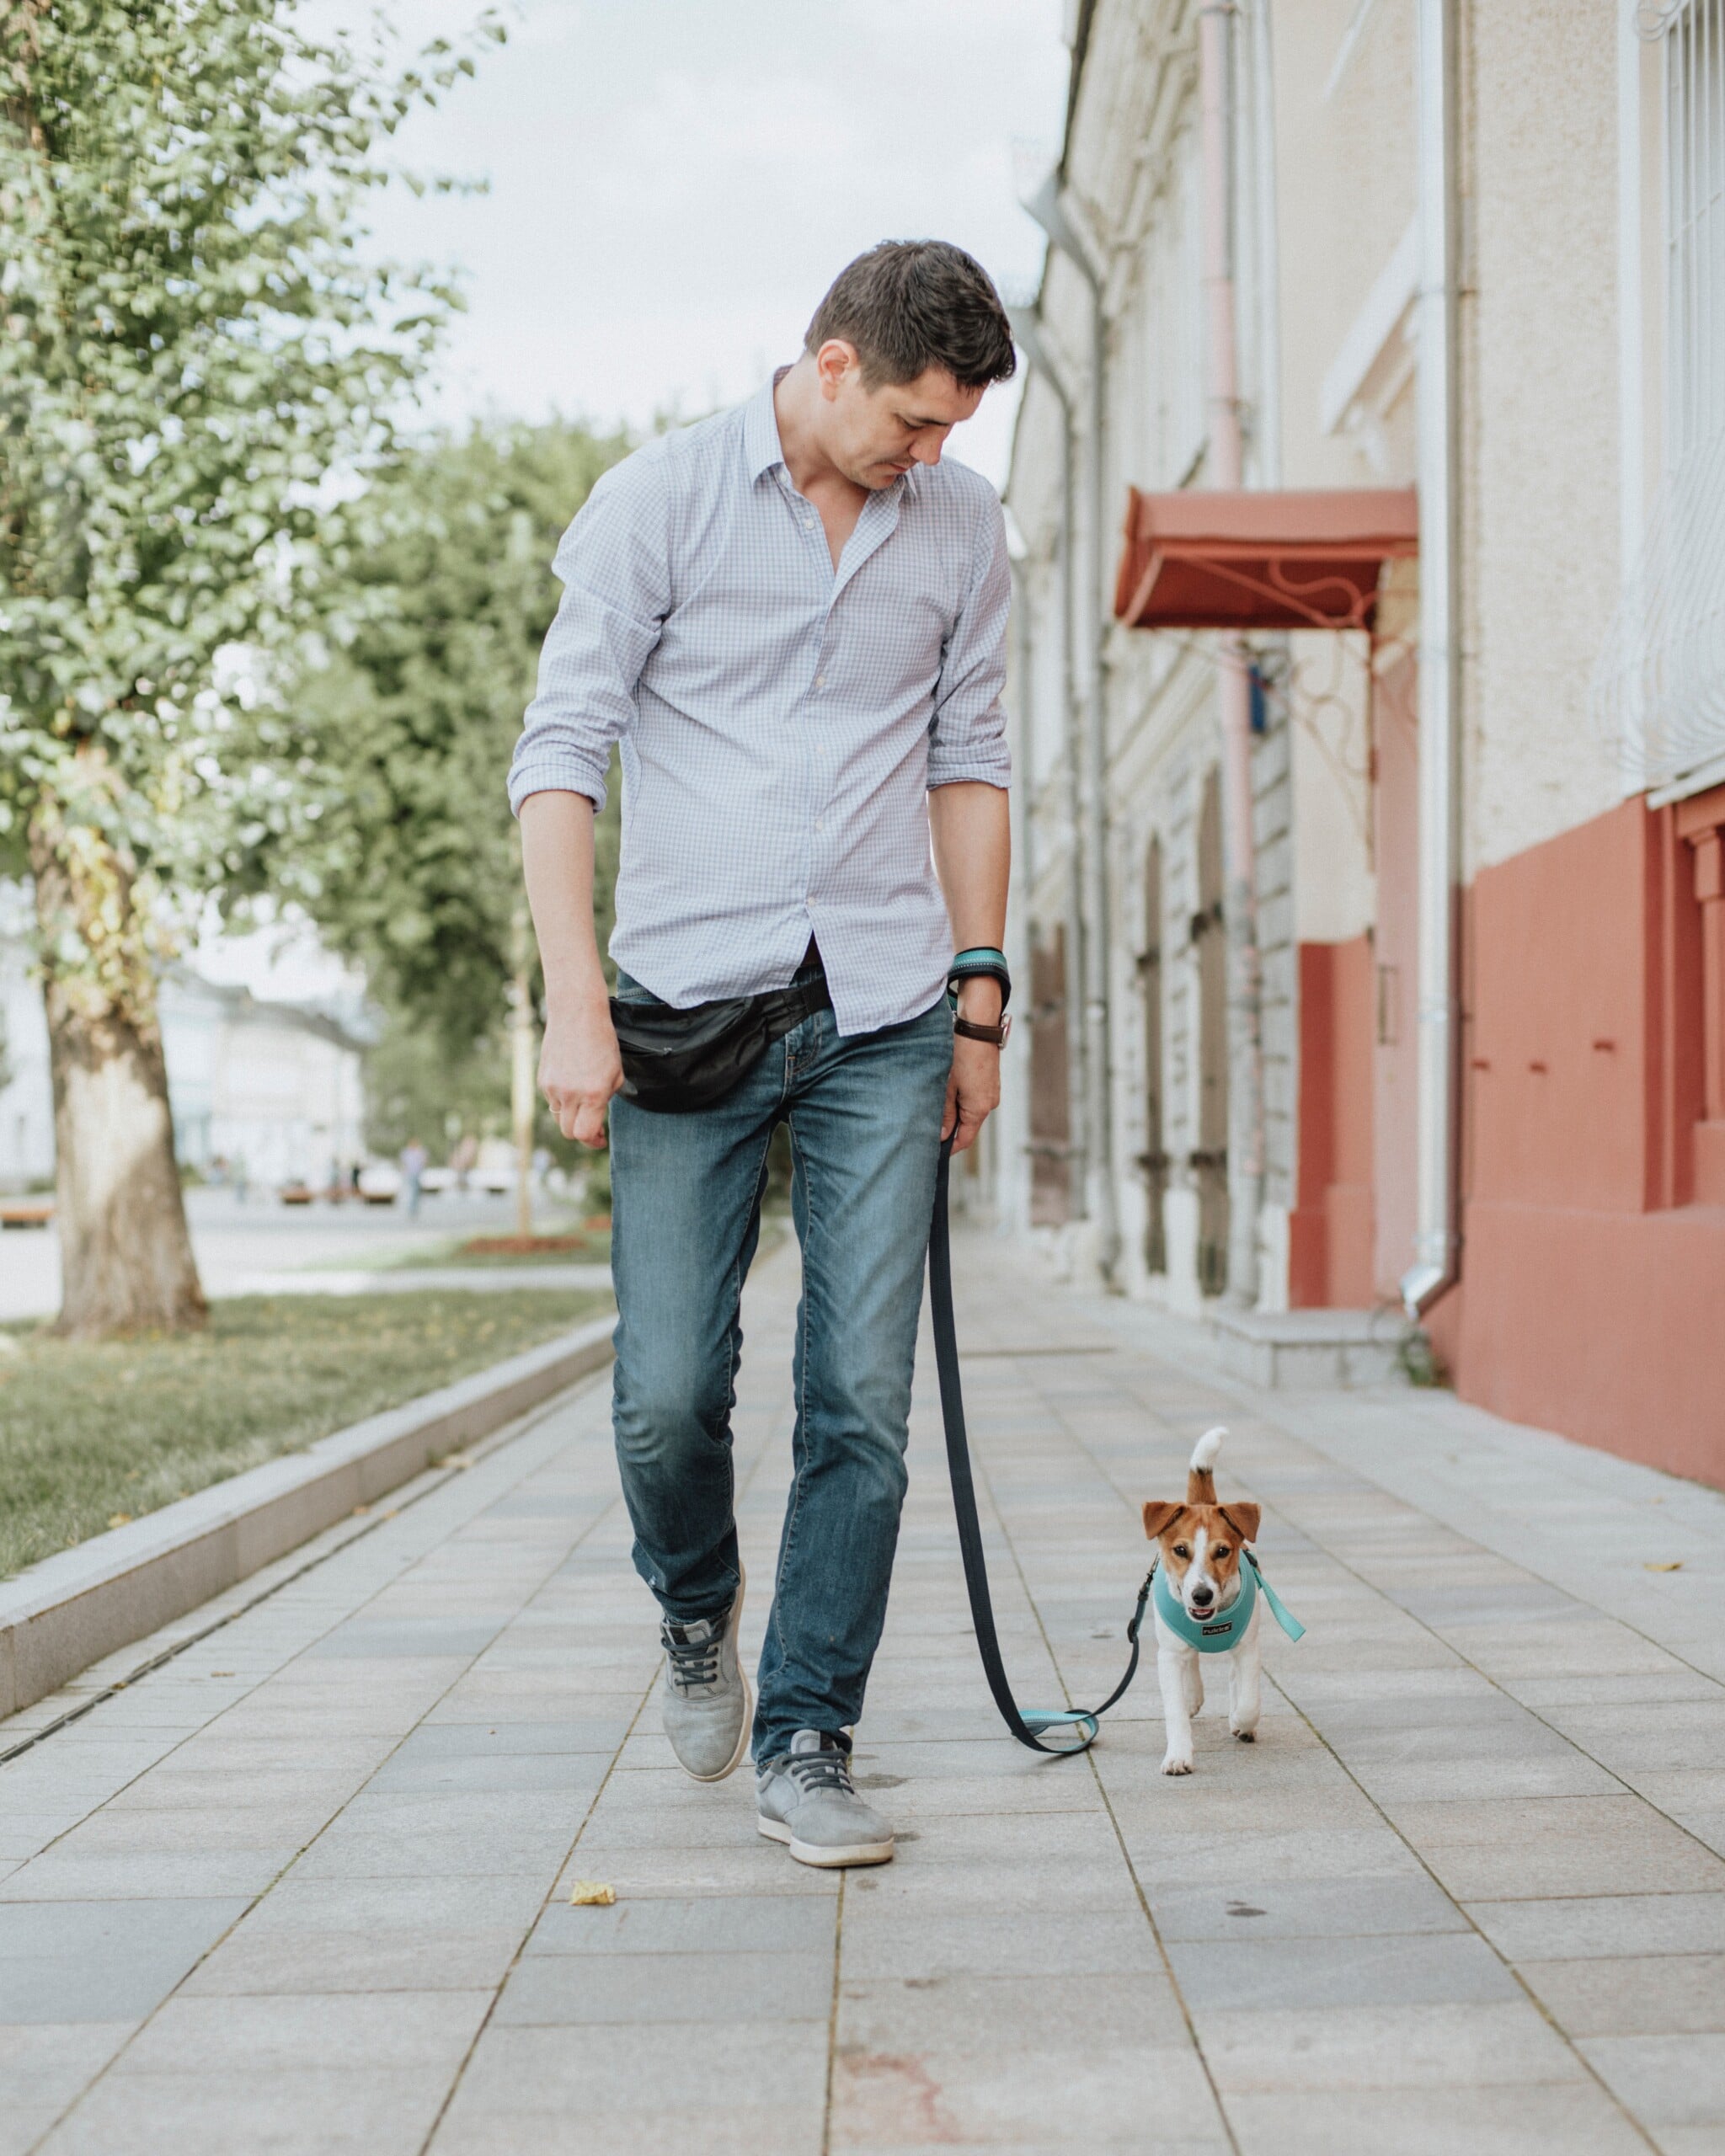 How Often Do You Walk Your Dog? | 3 Important things To Consider